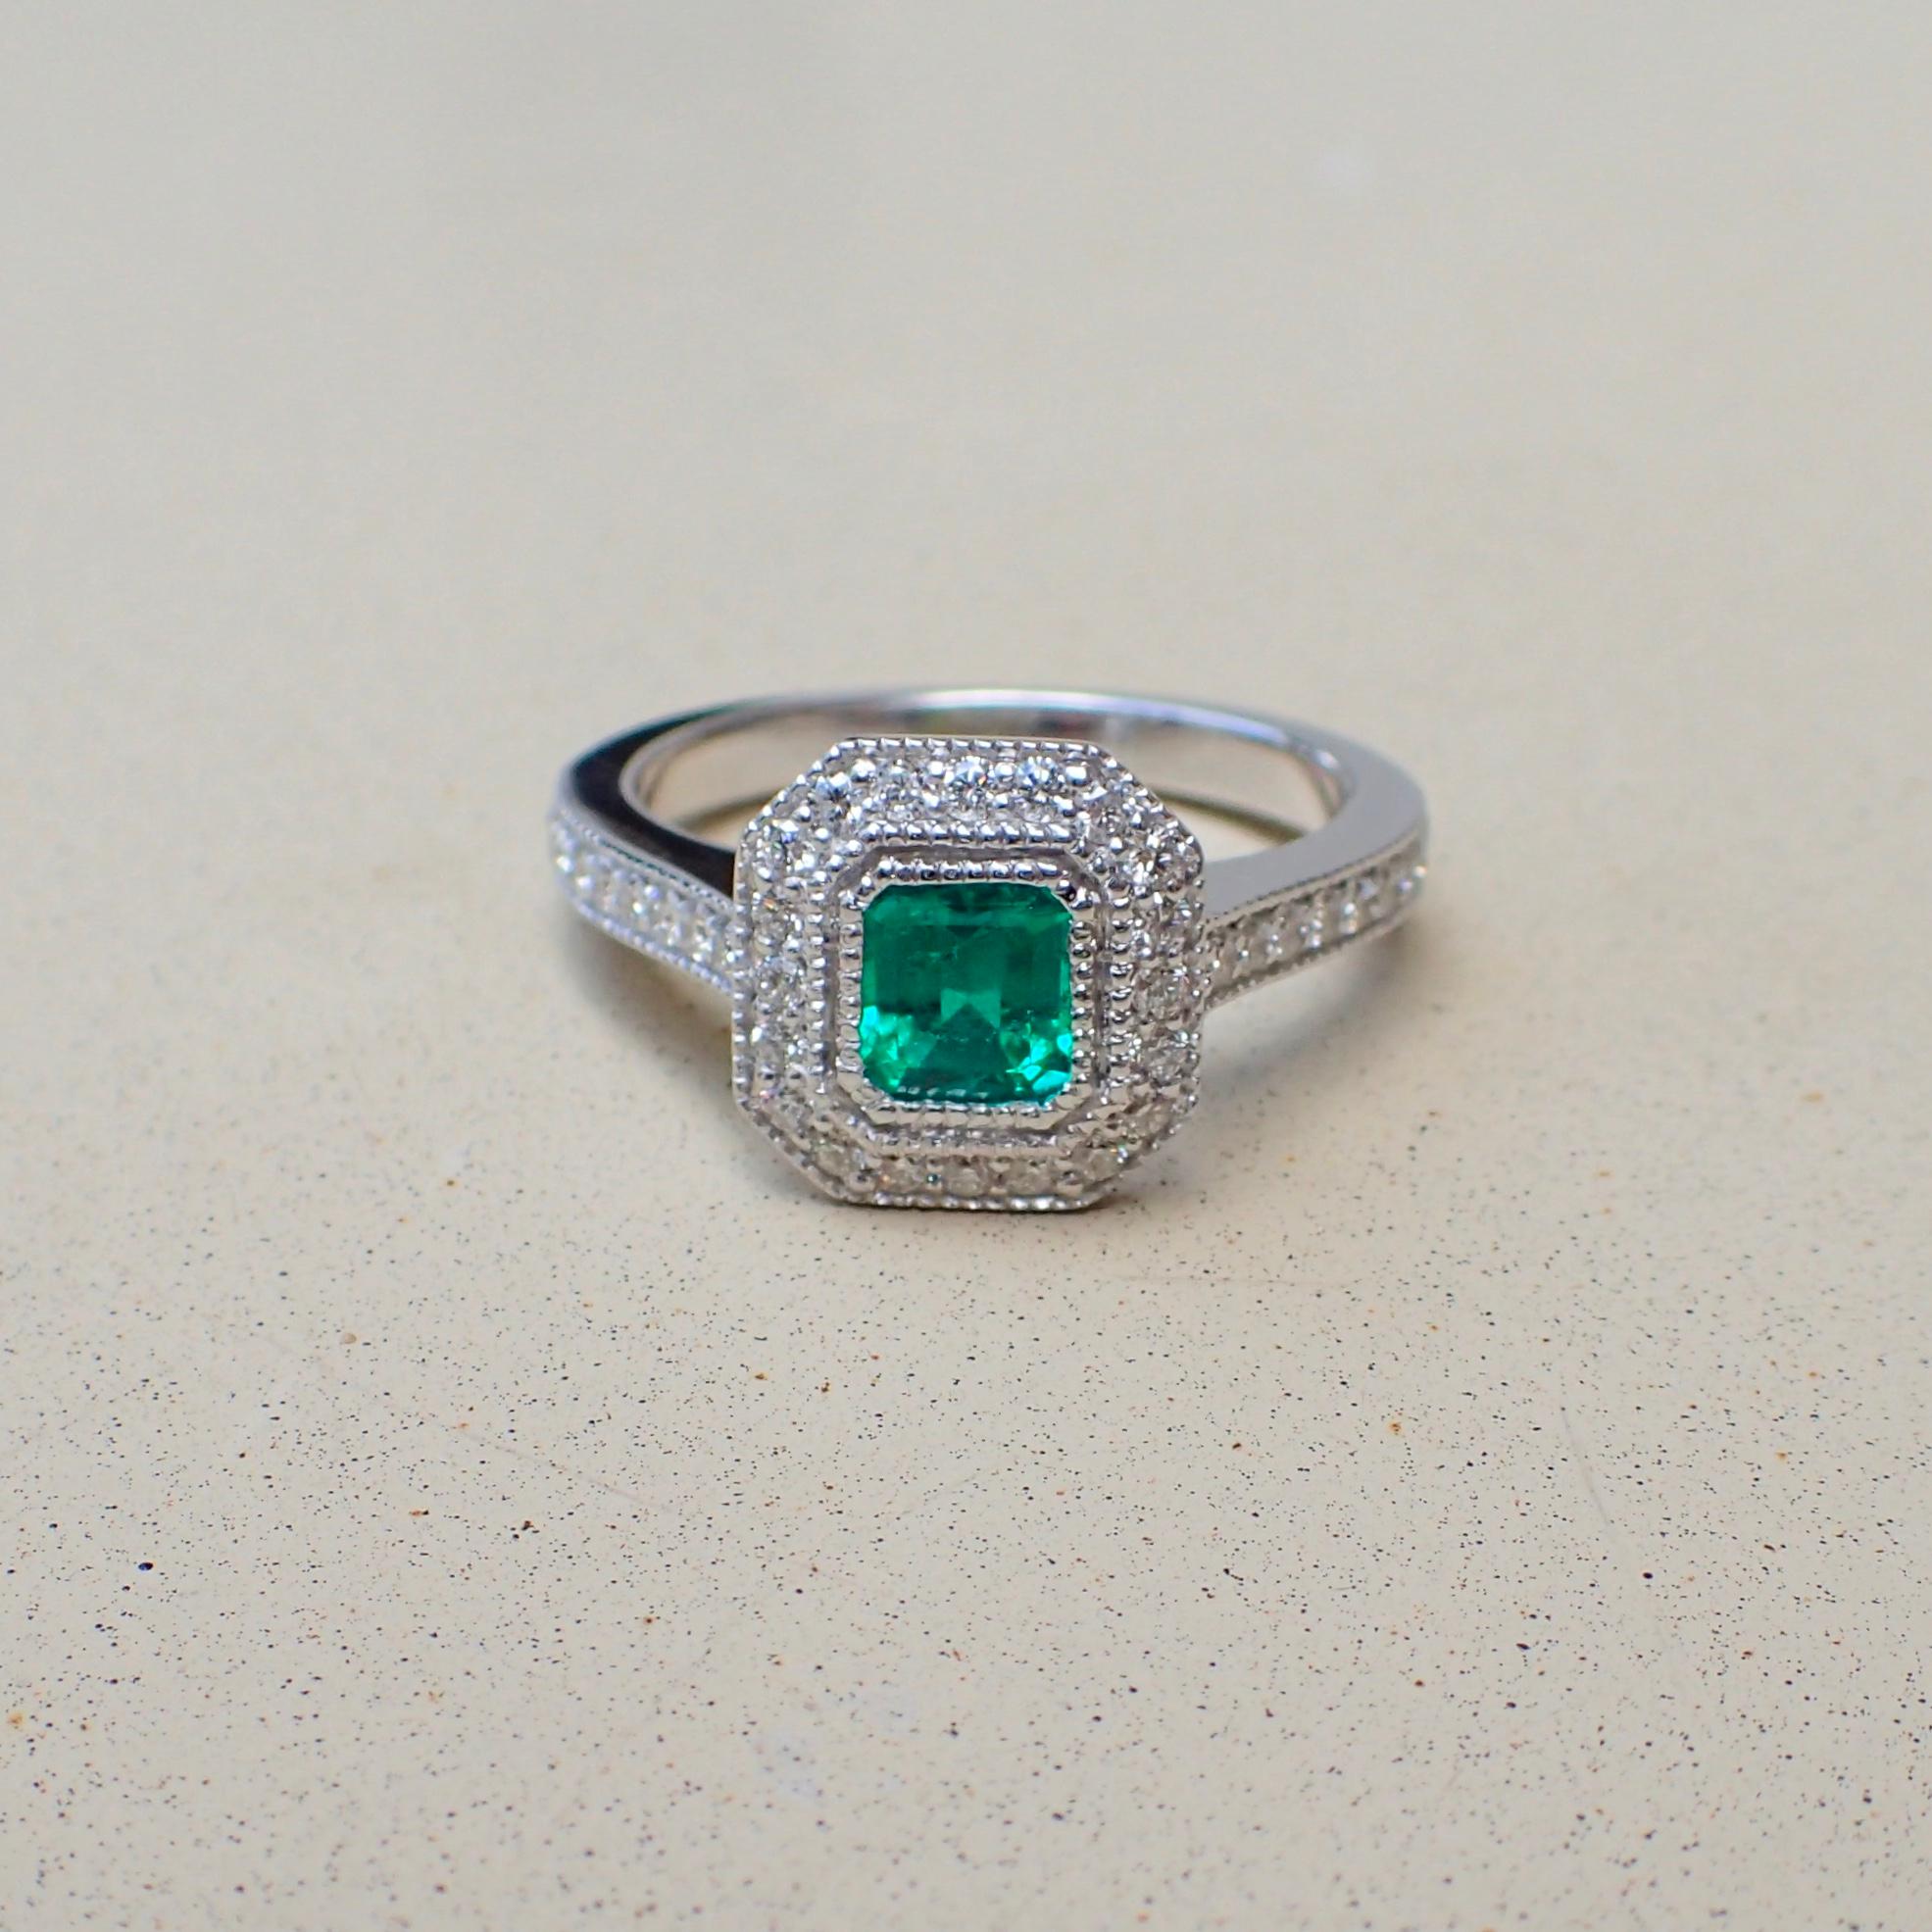 18 Karat White Gold Ring with a 0.518 Carat Emerald and 0.37 Carat of Diamond 4